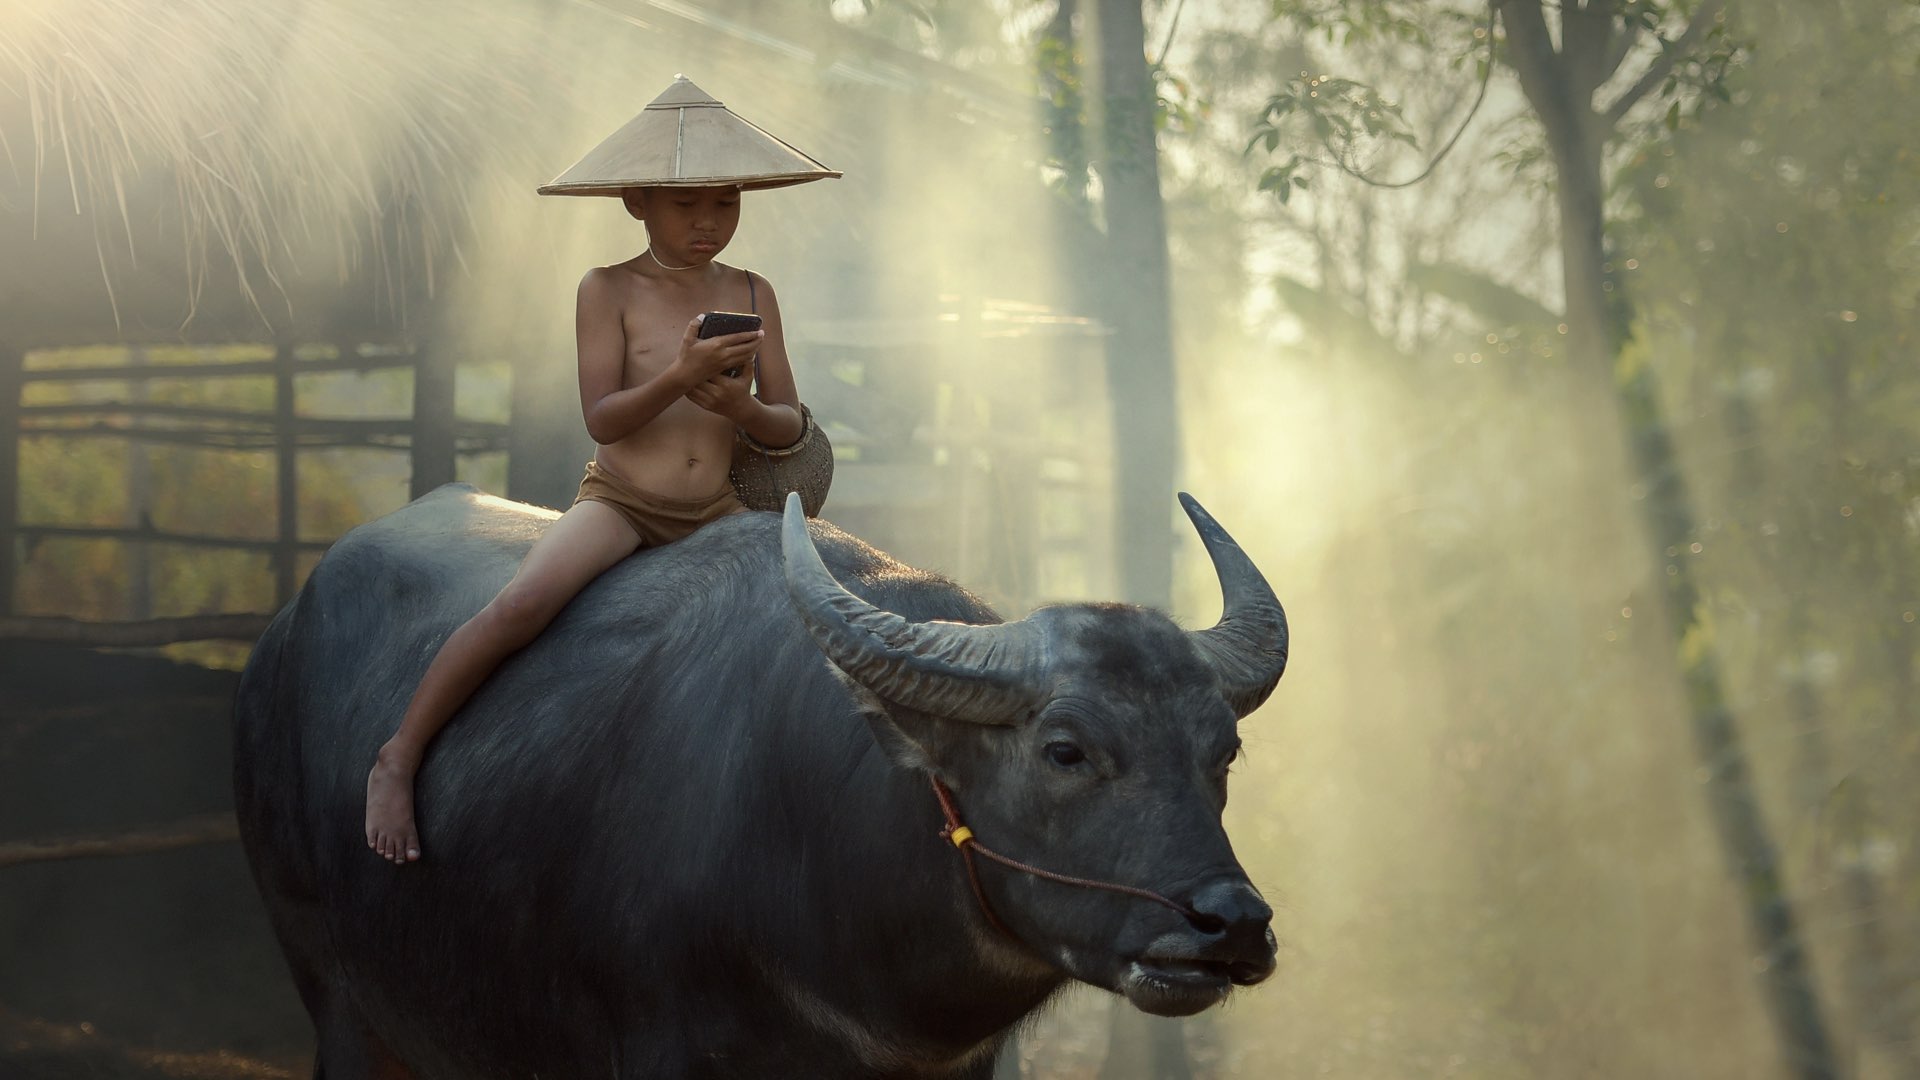 Photo of a child riding a bovine animal while using a smartphone.